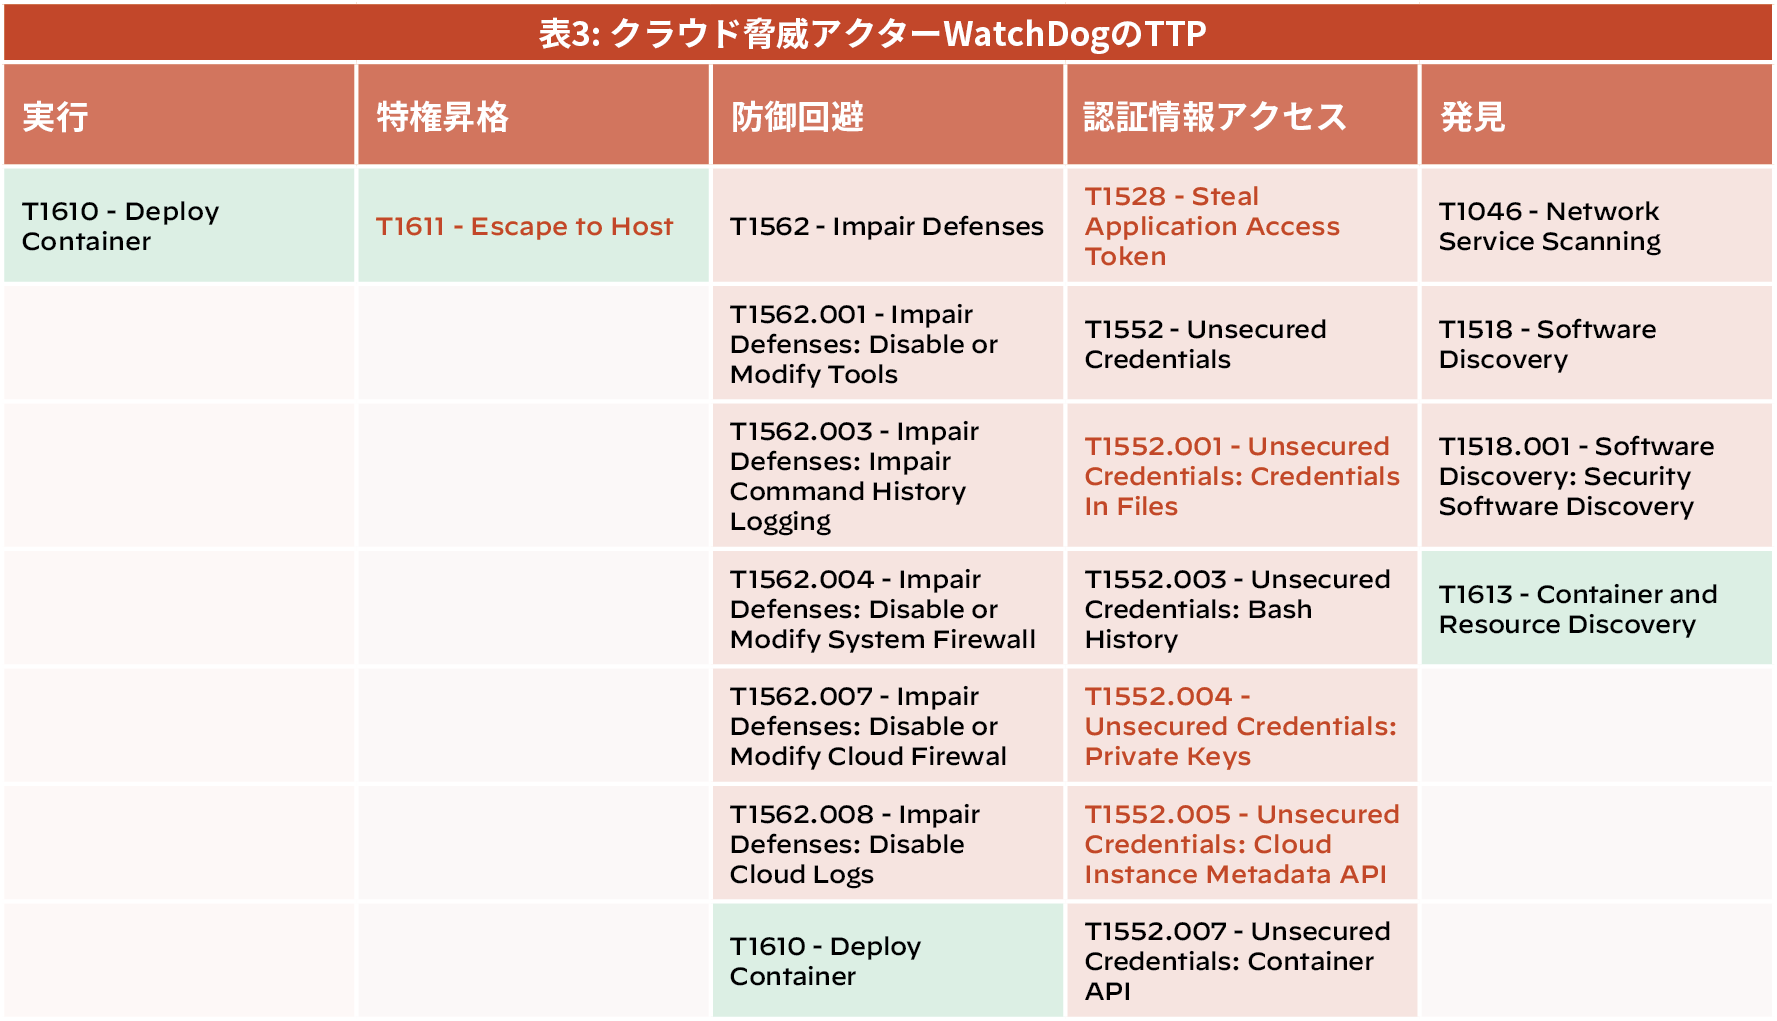 WatchDog クラウド脅威アクターのTTP: Execution - T1610 - Deploy Container; Privilege Escalation - T1611 - Escape to Host; Defense Evasion - T1562 - Impair Defenses, T1562.001 - Impair Defenses: Impair Command History Logging, T1562.004 - Impair Defenses: Disable or Modify System Firewall, T1562.007 - Impair Defenses: Disable or Modify Cloud Firewall, T1562.008 - Impair Defenses: Disable Cloud Logs, T1610 - Deploy Container; Credential Access - T1528 - Steal Application Access Token, T1552 - Unsecured Credentials, T1552.001 - Unsecured Credentials: Credentials in Files, T1552.003 - Unsecured Credentials: Bash History, T1552.004 - Unsecured Credentials: Private Keys, T1552.005 - Unsecured Credentials: Cloud Instance Metadata API, T1552.007 - Unsecured Credentials: Container API; Discovery - T1046 - Network Service Scanning, T1518 - Software Discovery, T1518.001 - Software Discovery: Security Software Discovery, T1613 - Container and Resource Discovery